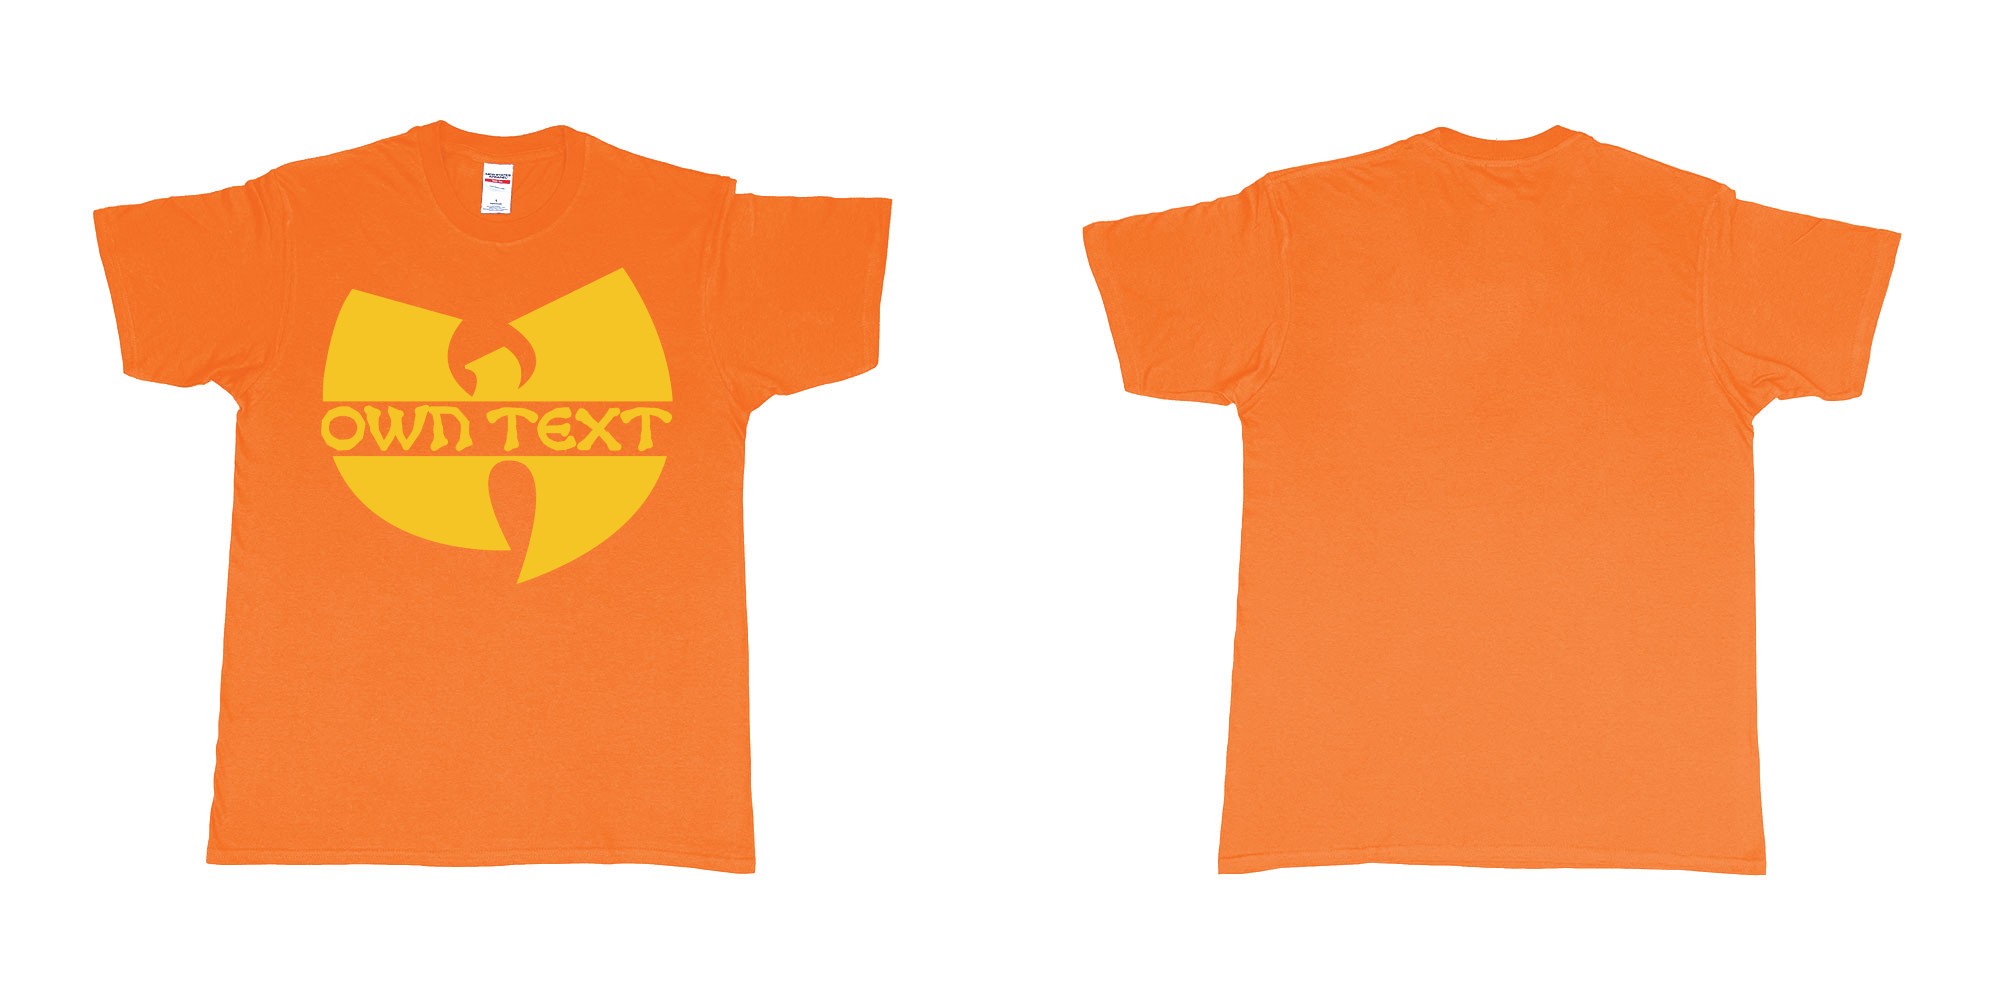 Custom tshirt design wu tang clan logo in fabric color orange choice your own text made in Bali by The Pirate Way